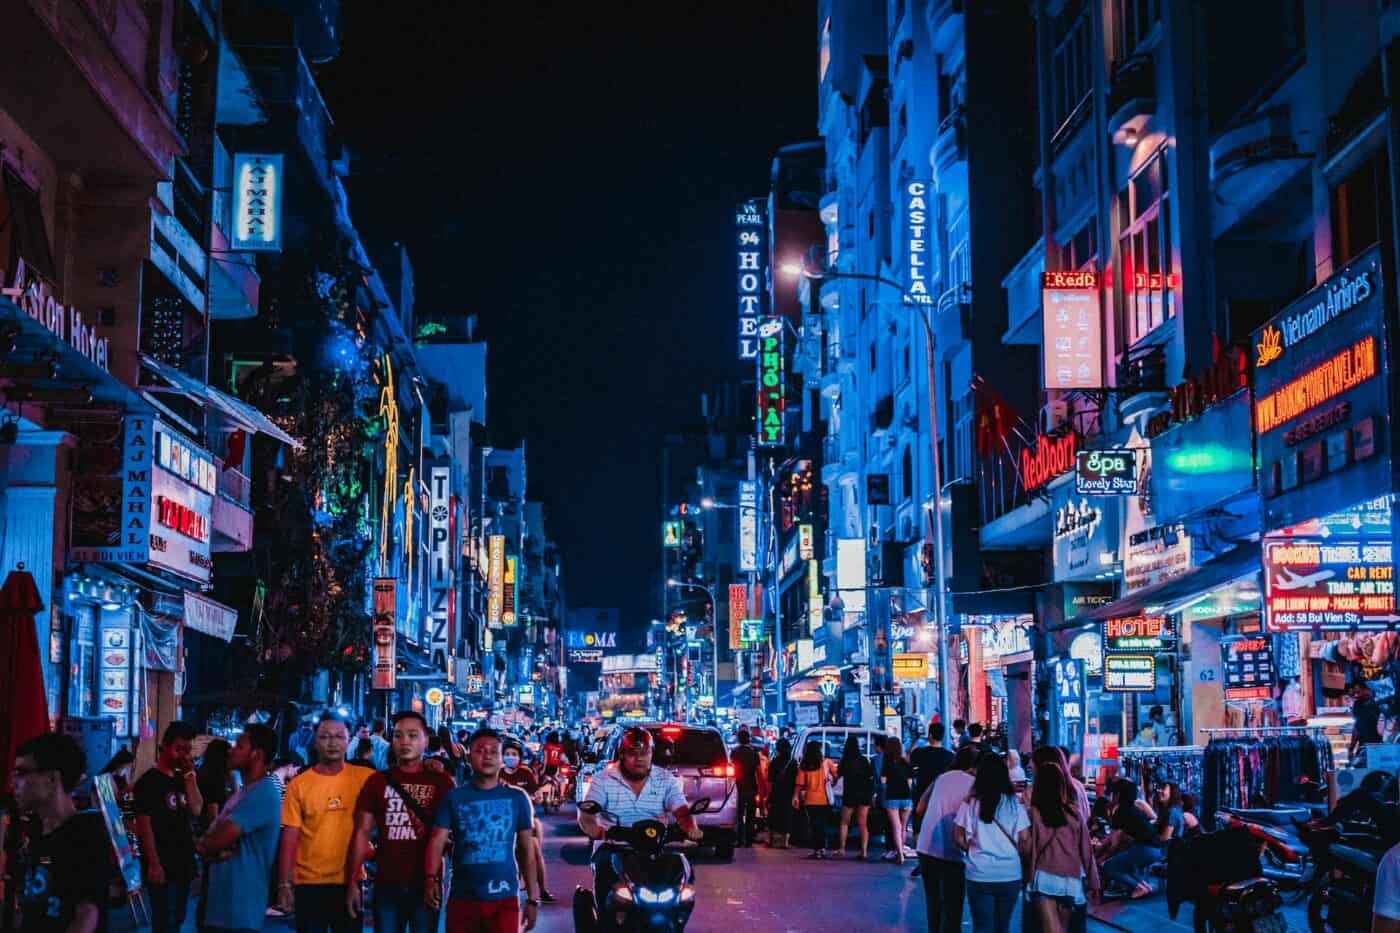 A crowded street in hot chi minh at night.